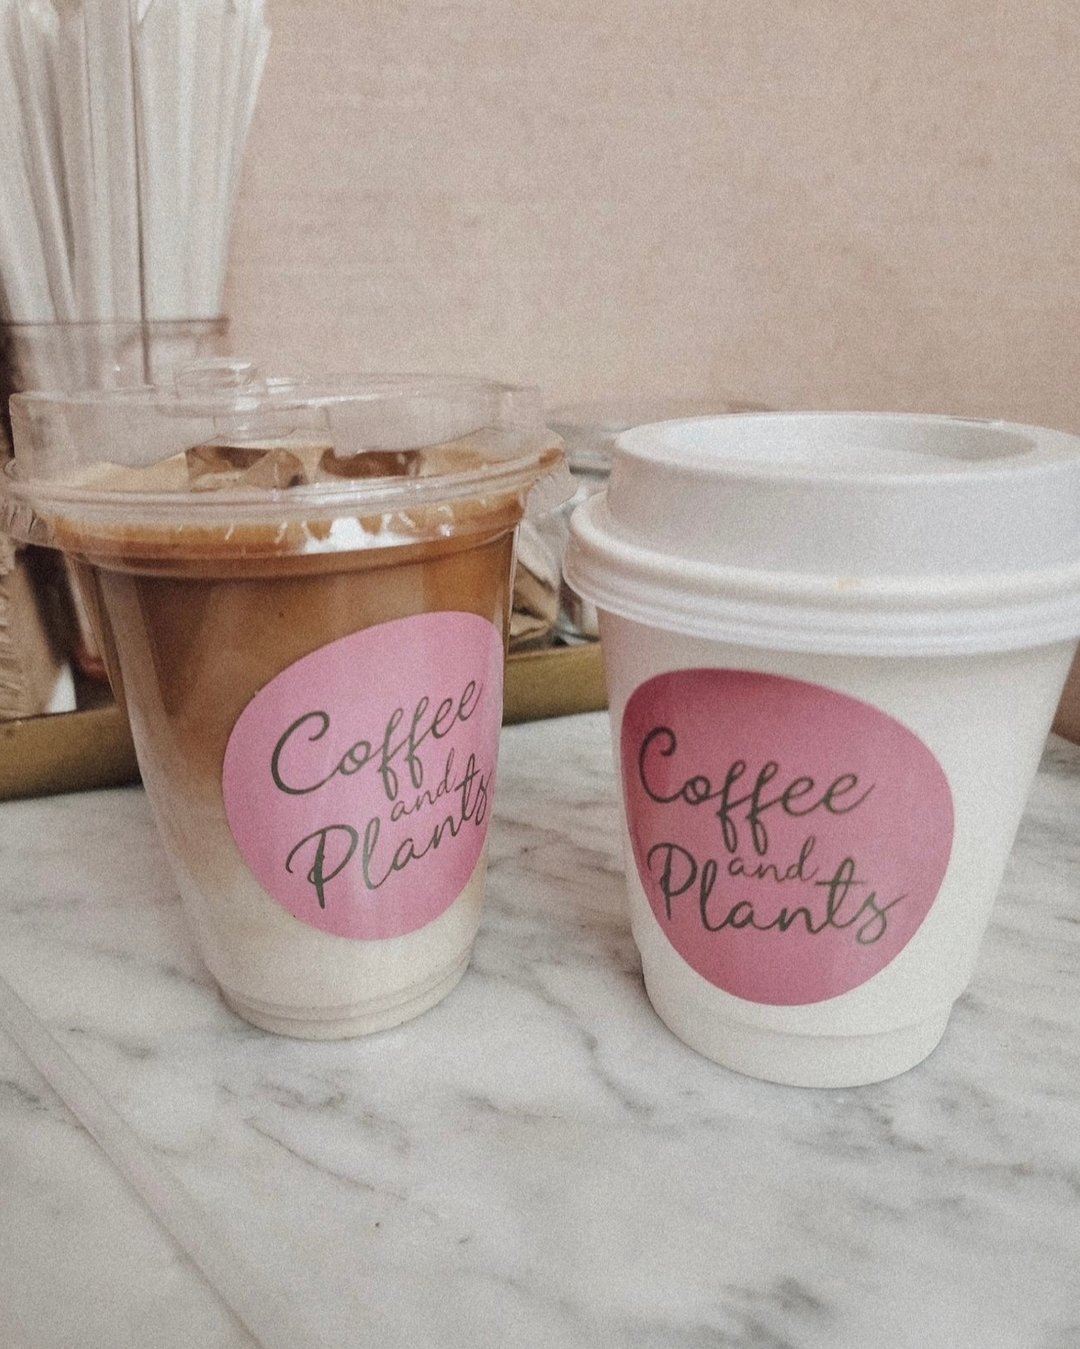 A sweet treat to end your week! ☕️🪴
📸 @lifebyharvie